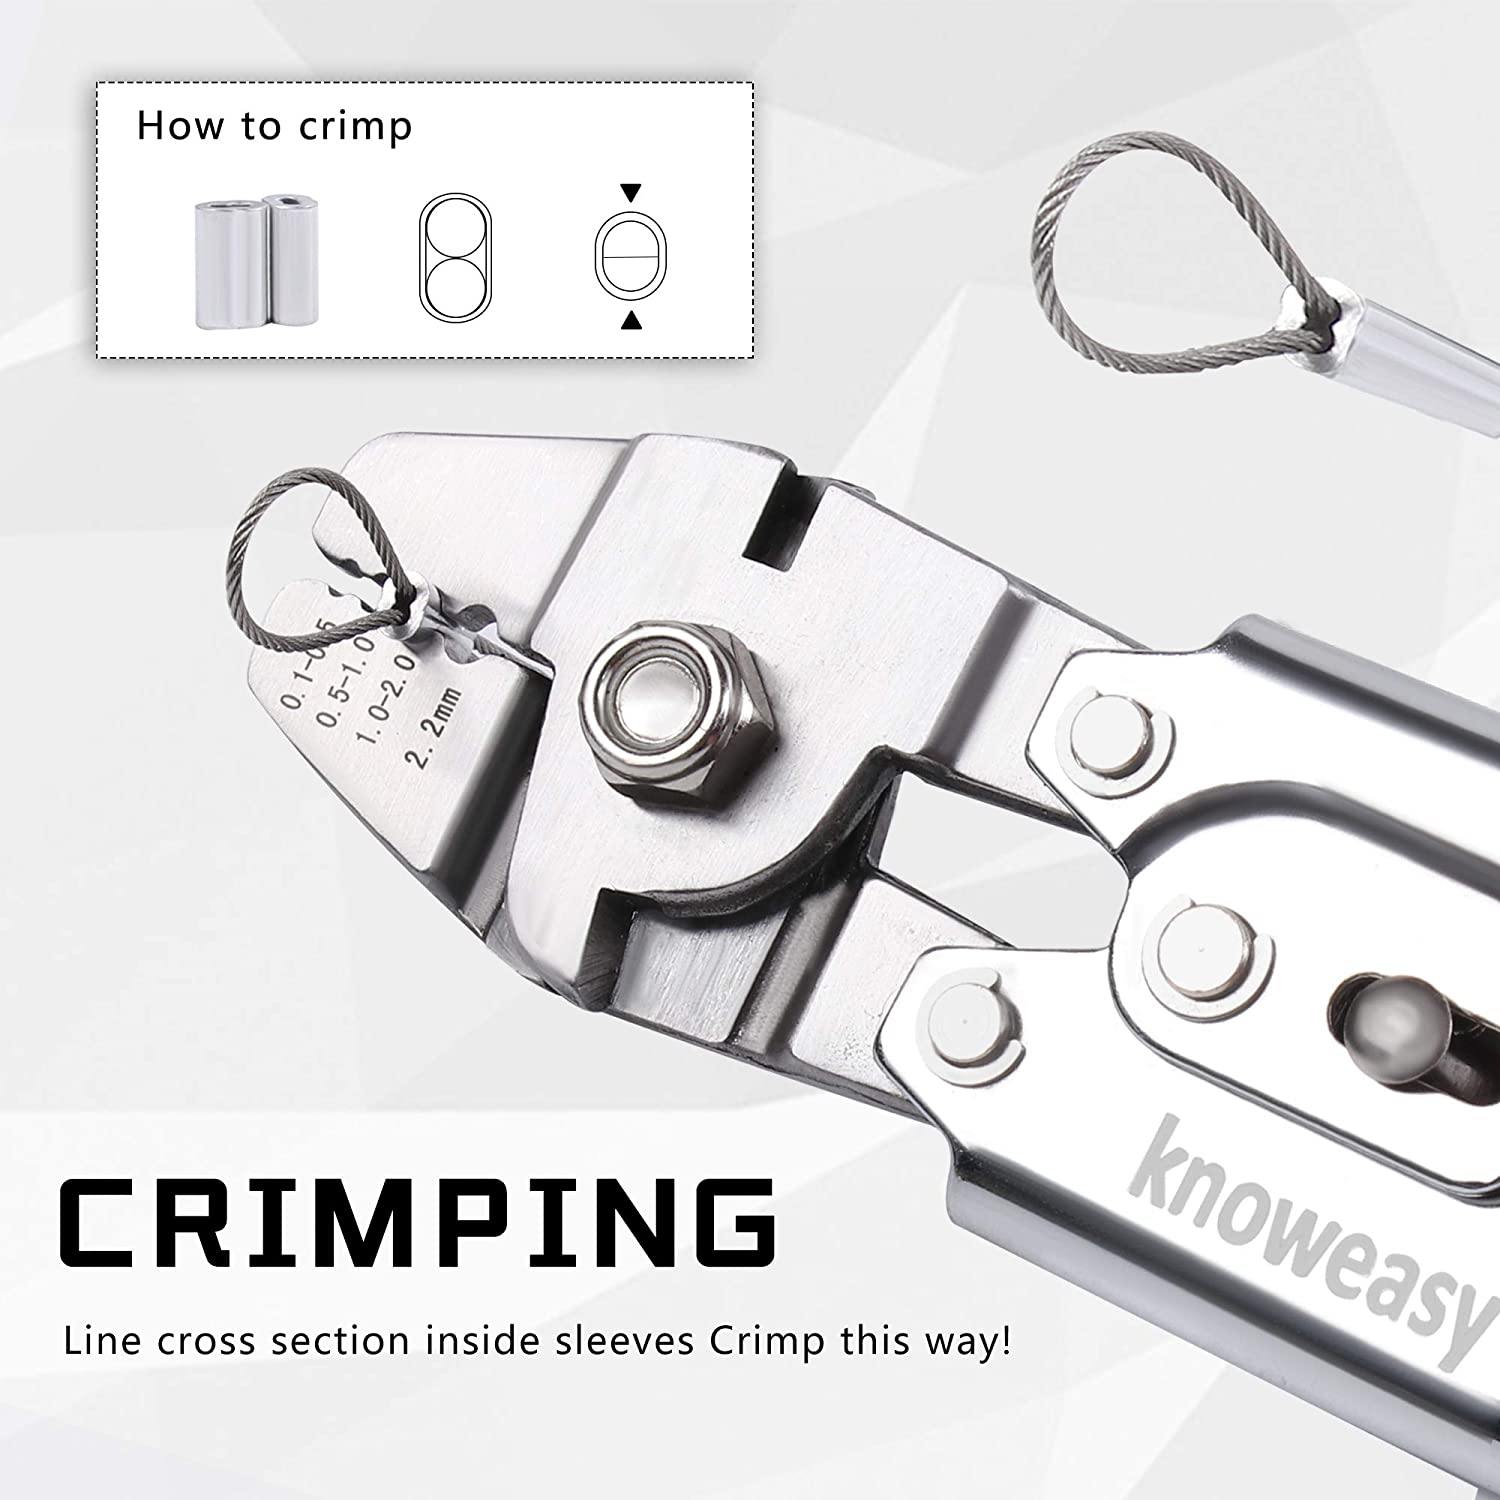 Wire Rope Crimper,Knoweasy Wire Crimper for Crimping Fishing Lines Up to  2.2mm Crimping Tools and Heavy Duty Stainless Steel Wire Rope Crimping Tool